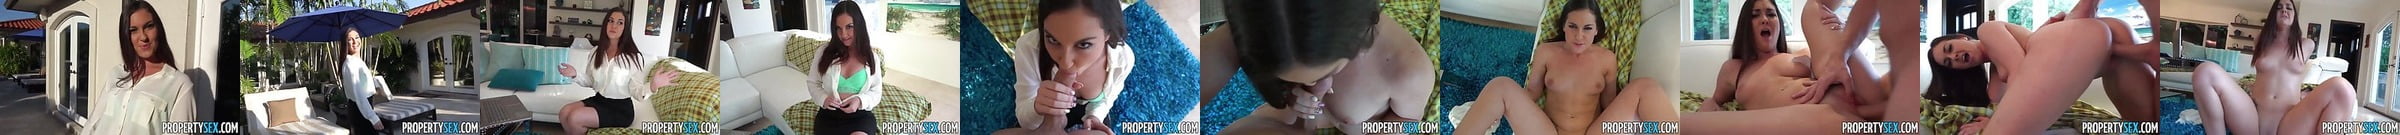 Propertysex House Humping Real Estate Agents Sex Video